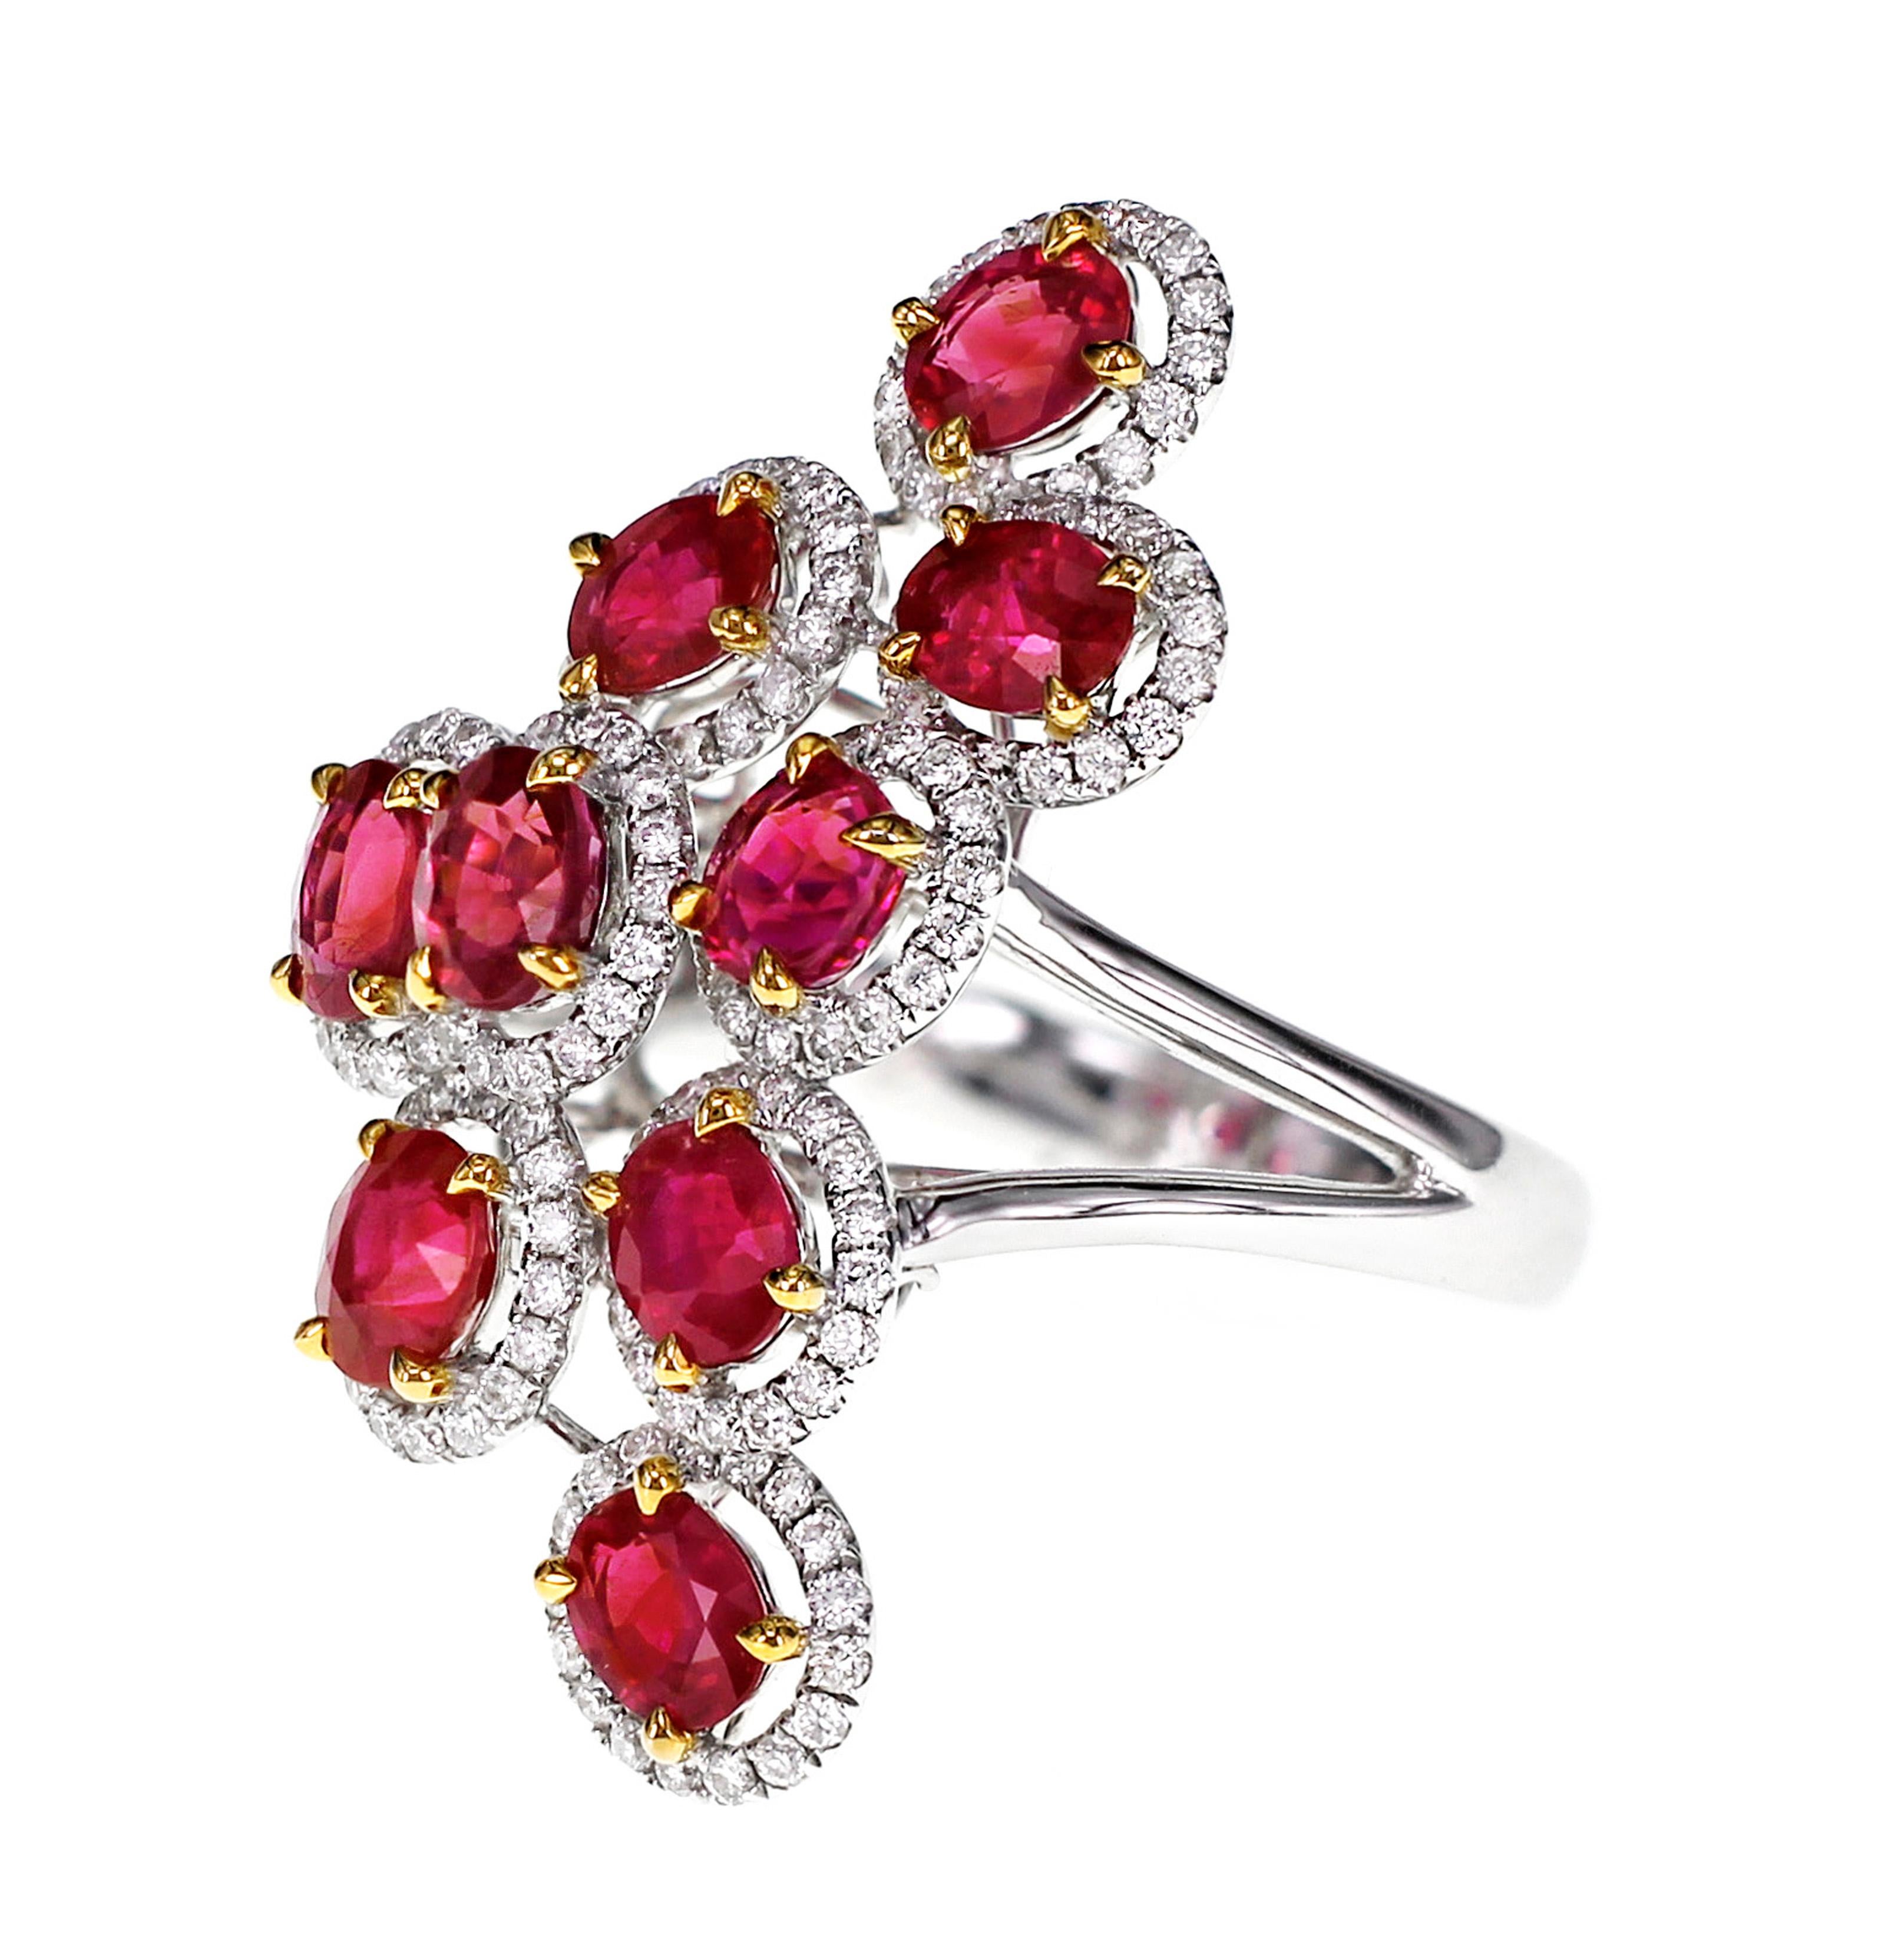 4.20 carat of vivid red ruby and 0.79 carat of white brilliant round diamond paired together in this designer ring.
The details of the ring are mentioned below:
Color: F
Clarity Vs
Ring Size: US 6.5
The ring size can be changed on request.